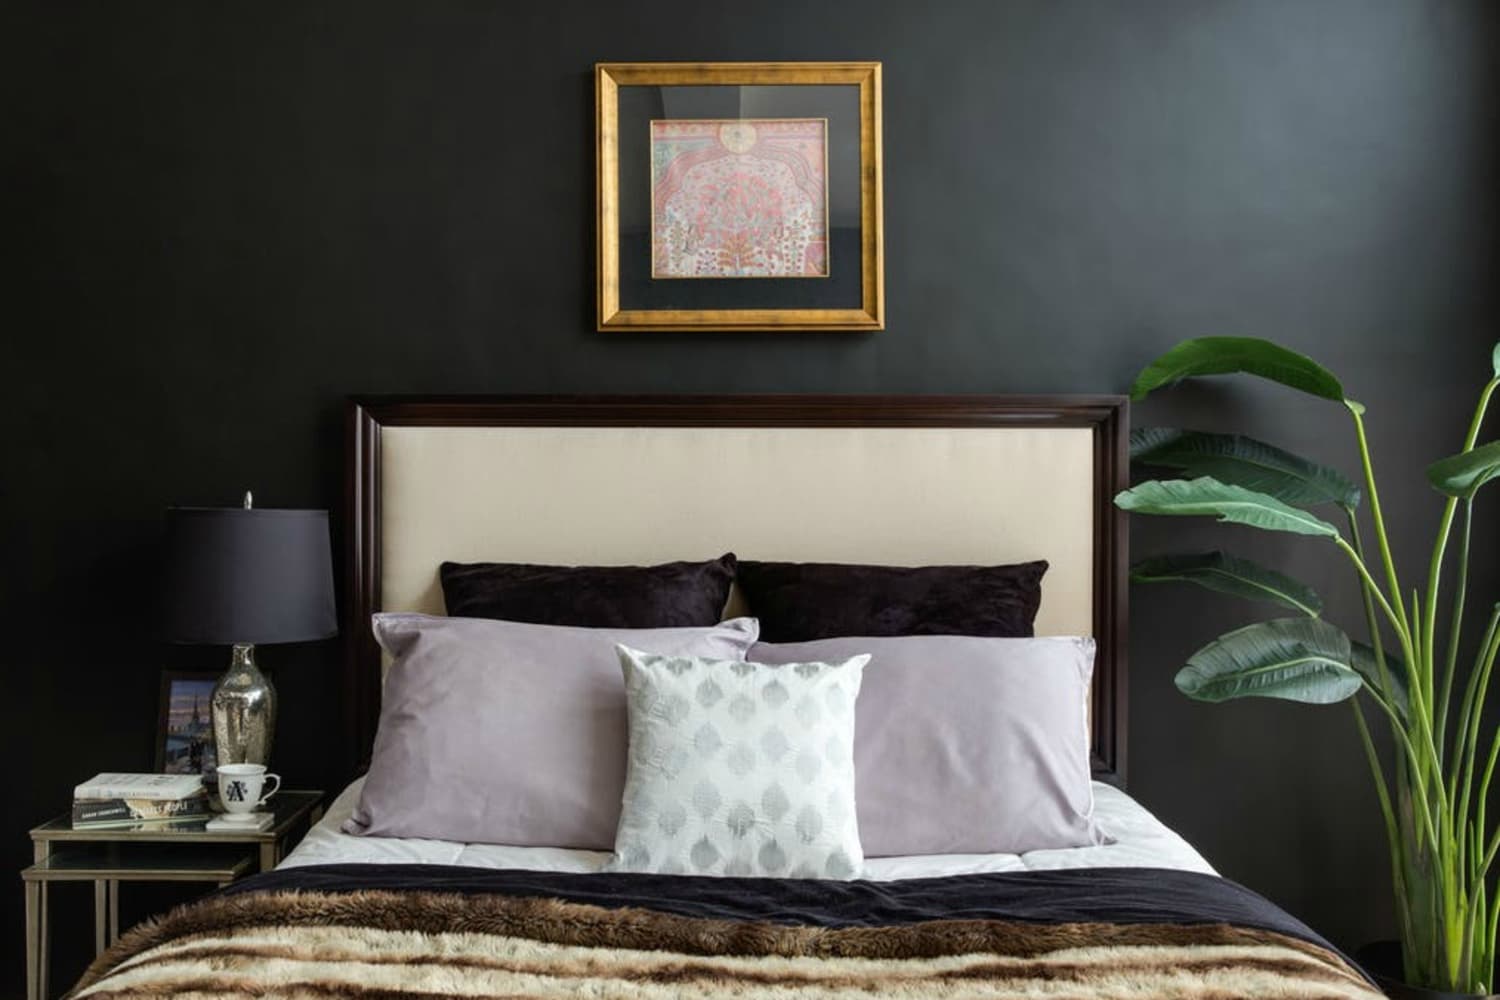 50 Decorative King and Queen Bed Pillow Arrangements & Ideas (PICTURES)